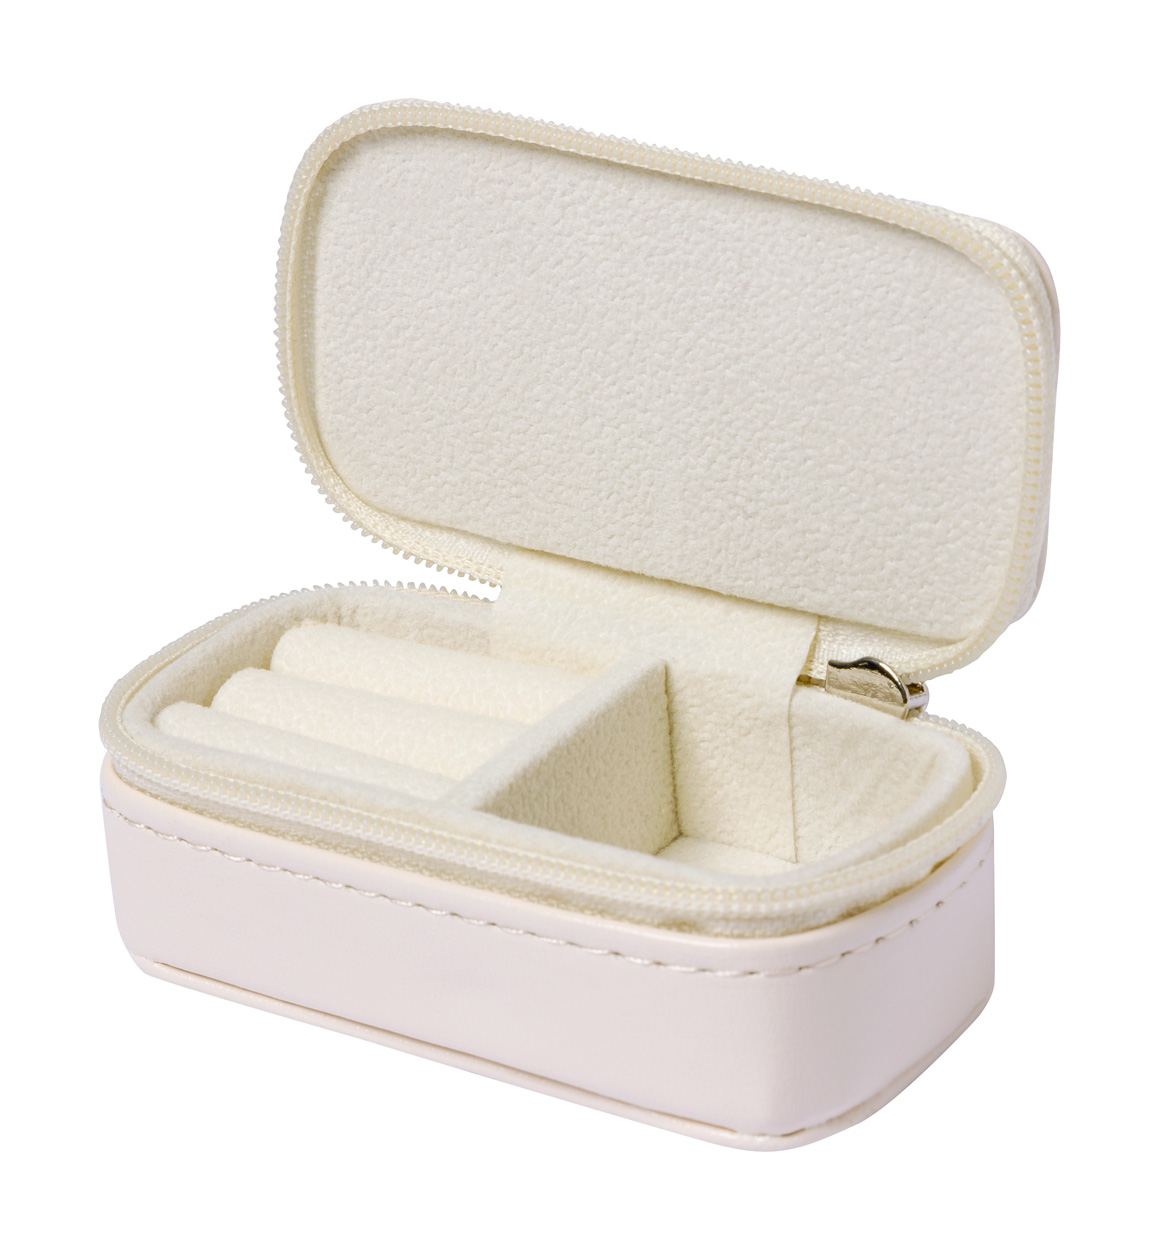 Moly jewellery box Natural